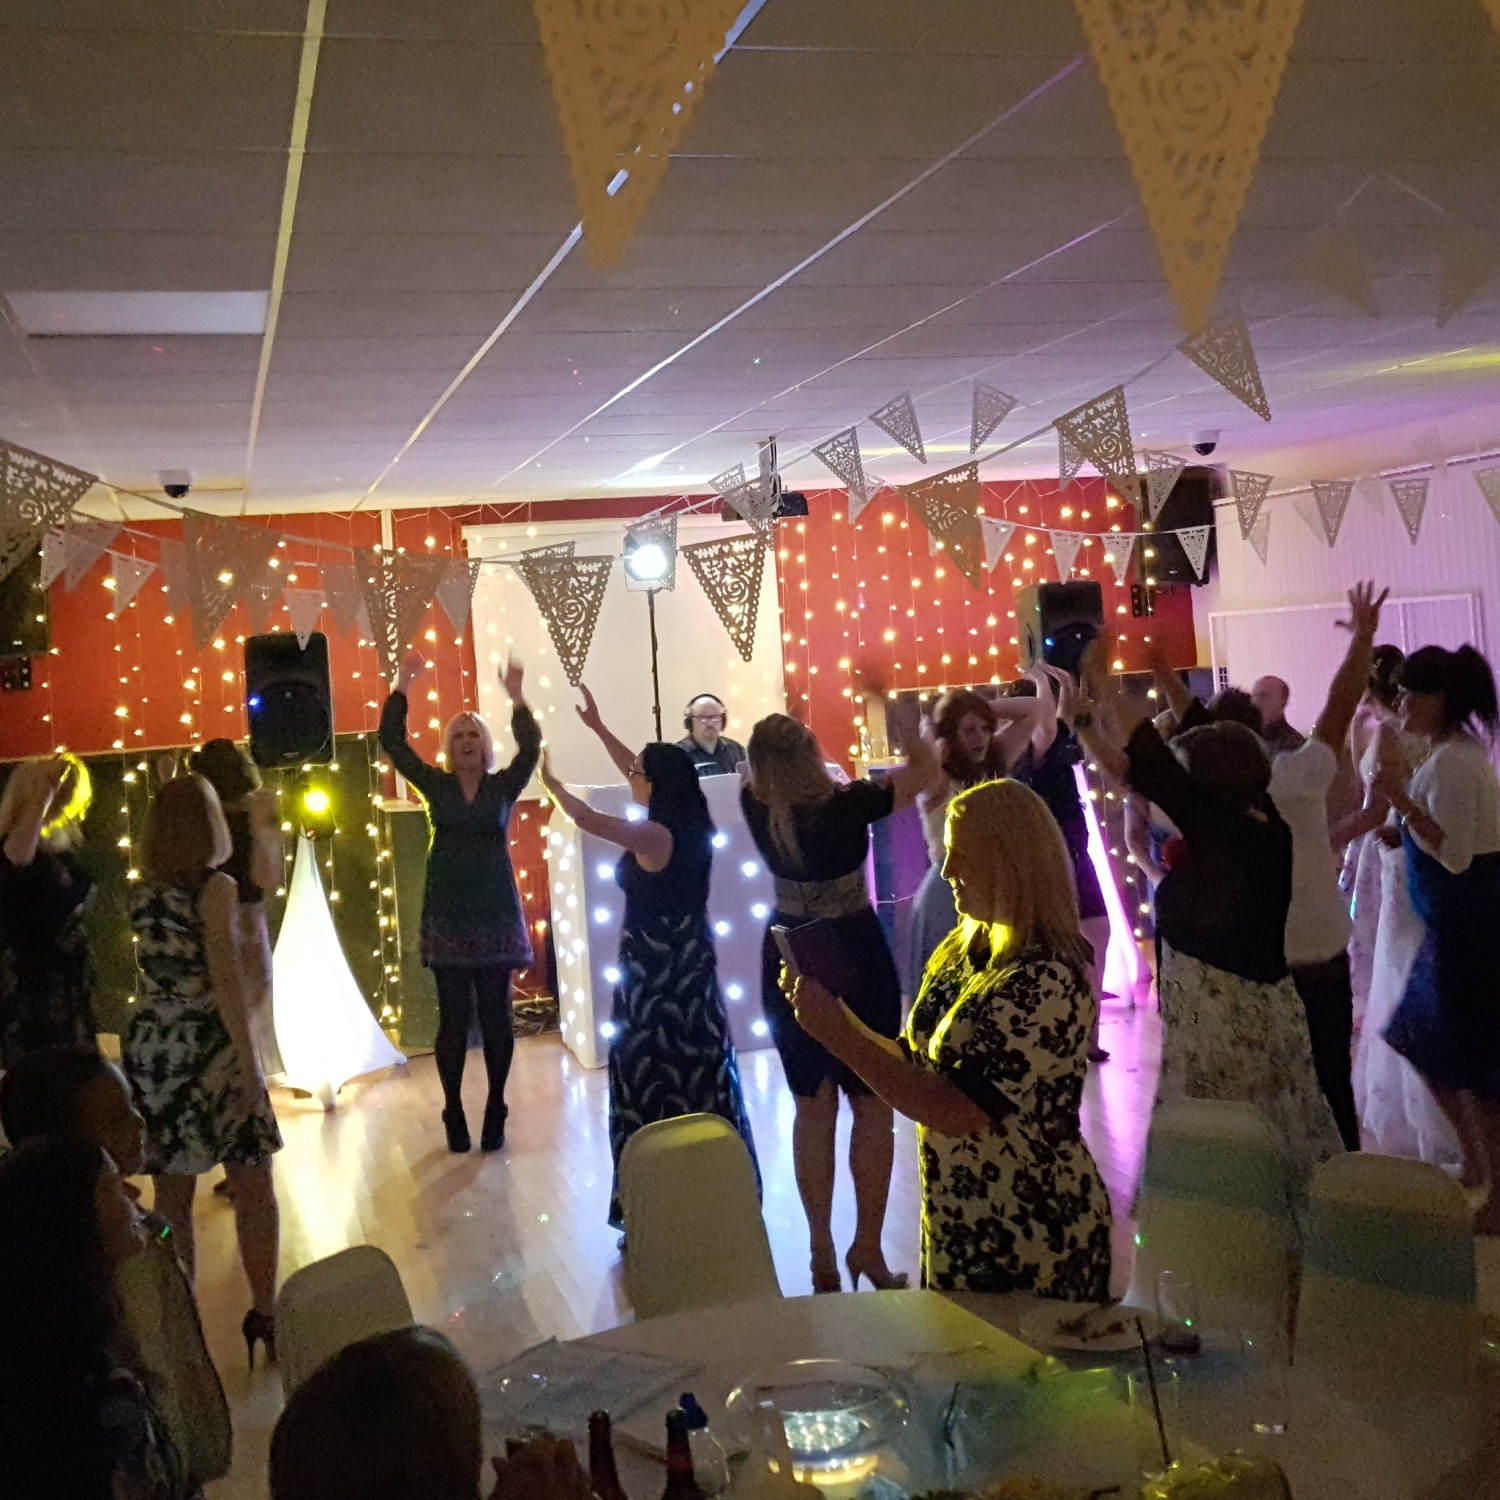 Guests raise their arms in air dancing in front of white DJ booth with lace bunting above their heads.